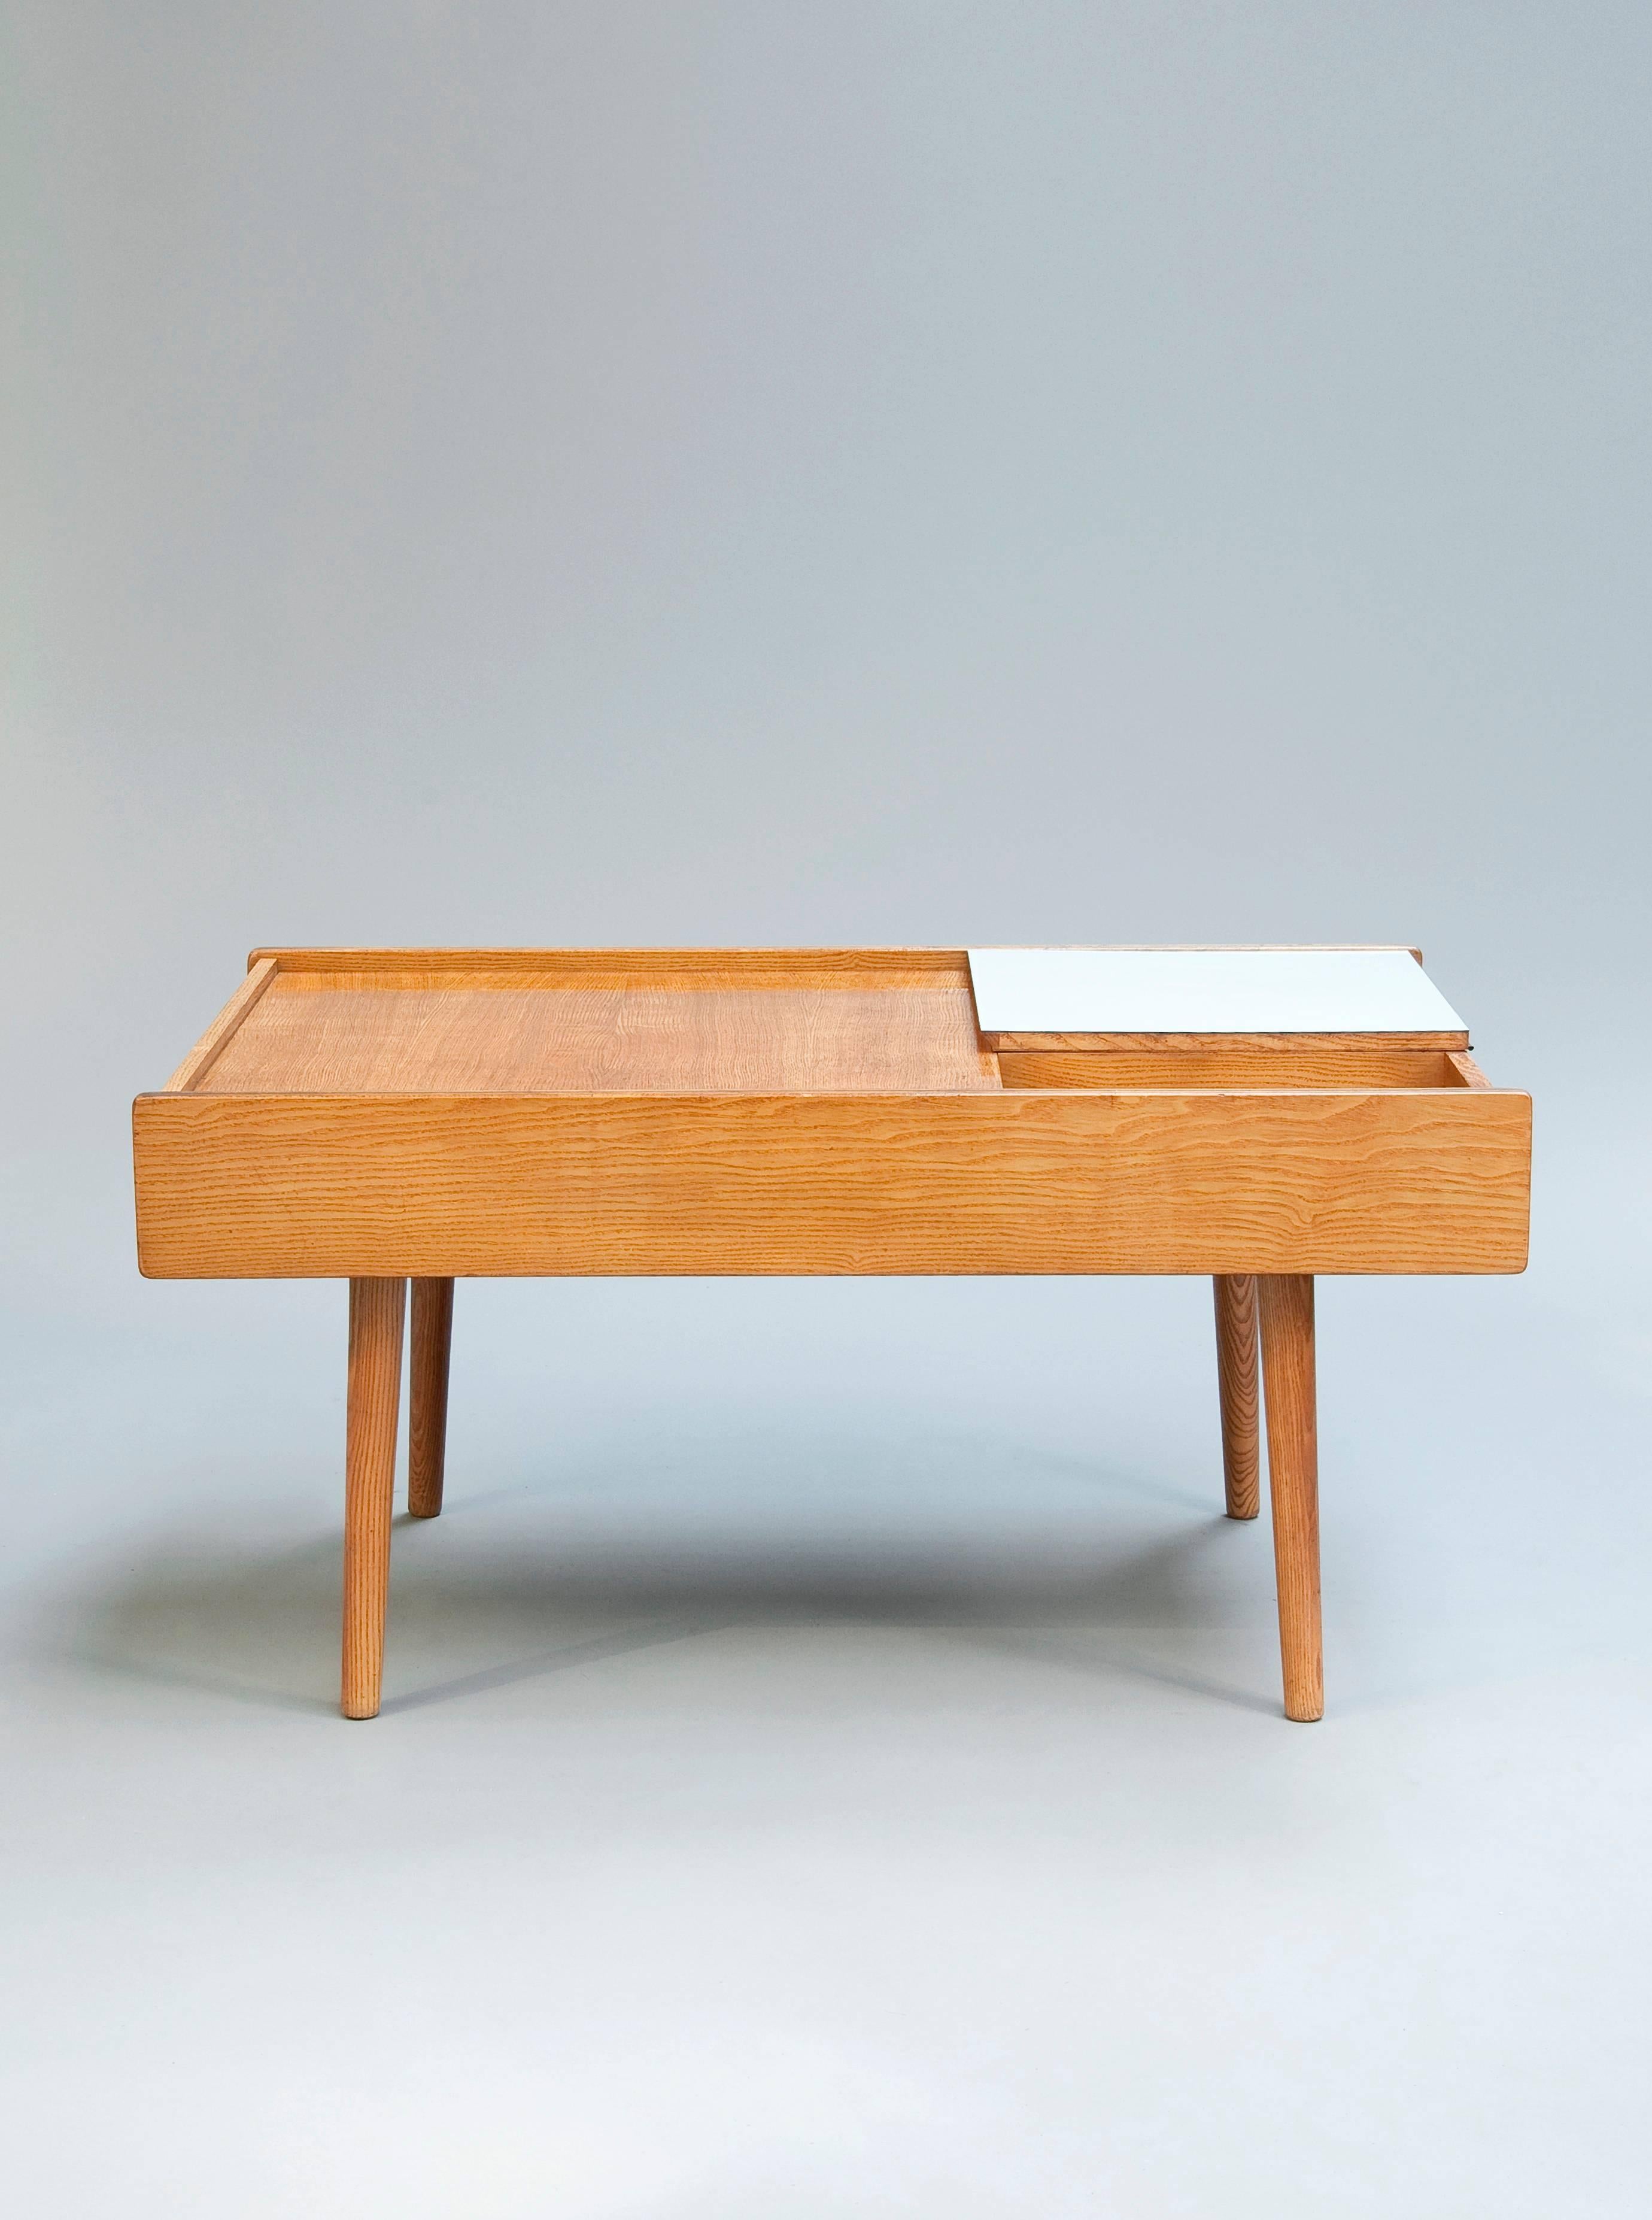 Mid-20th Century Low Table 119 by Pierre Paulin, Meubles TV Edition, 1953